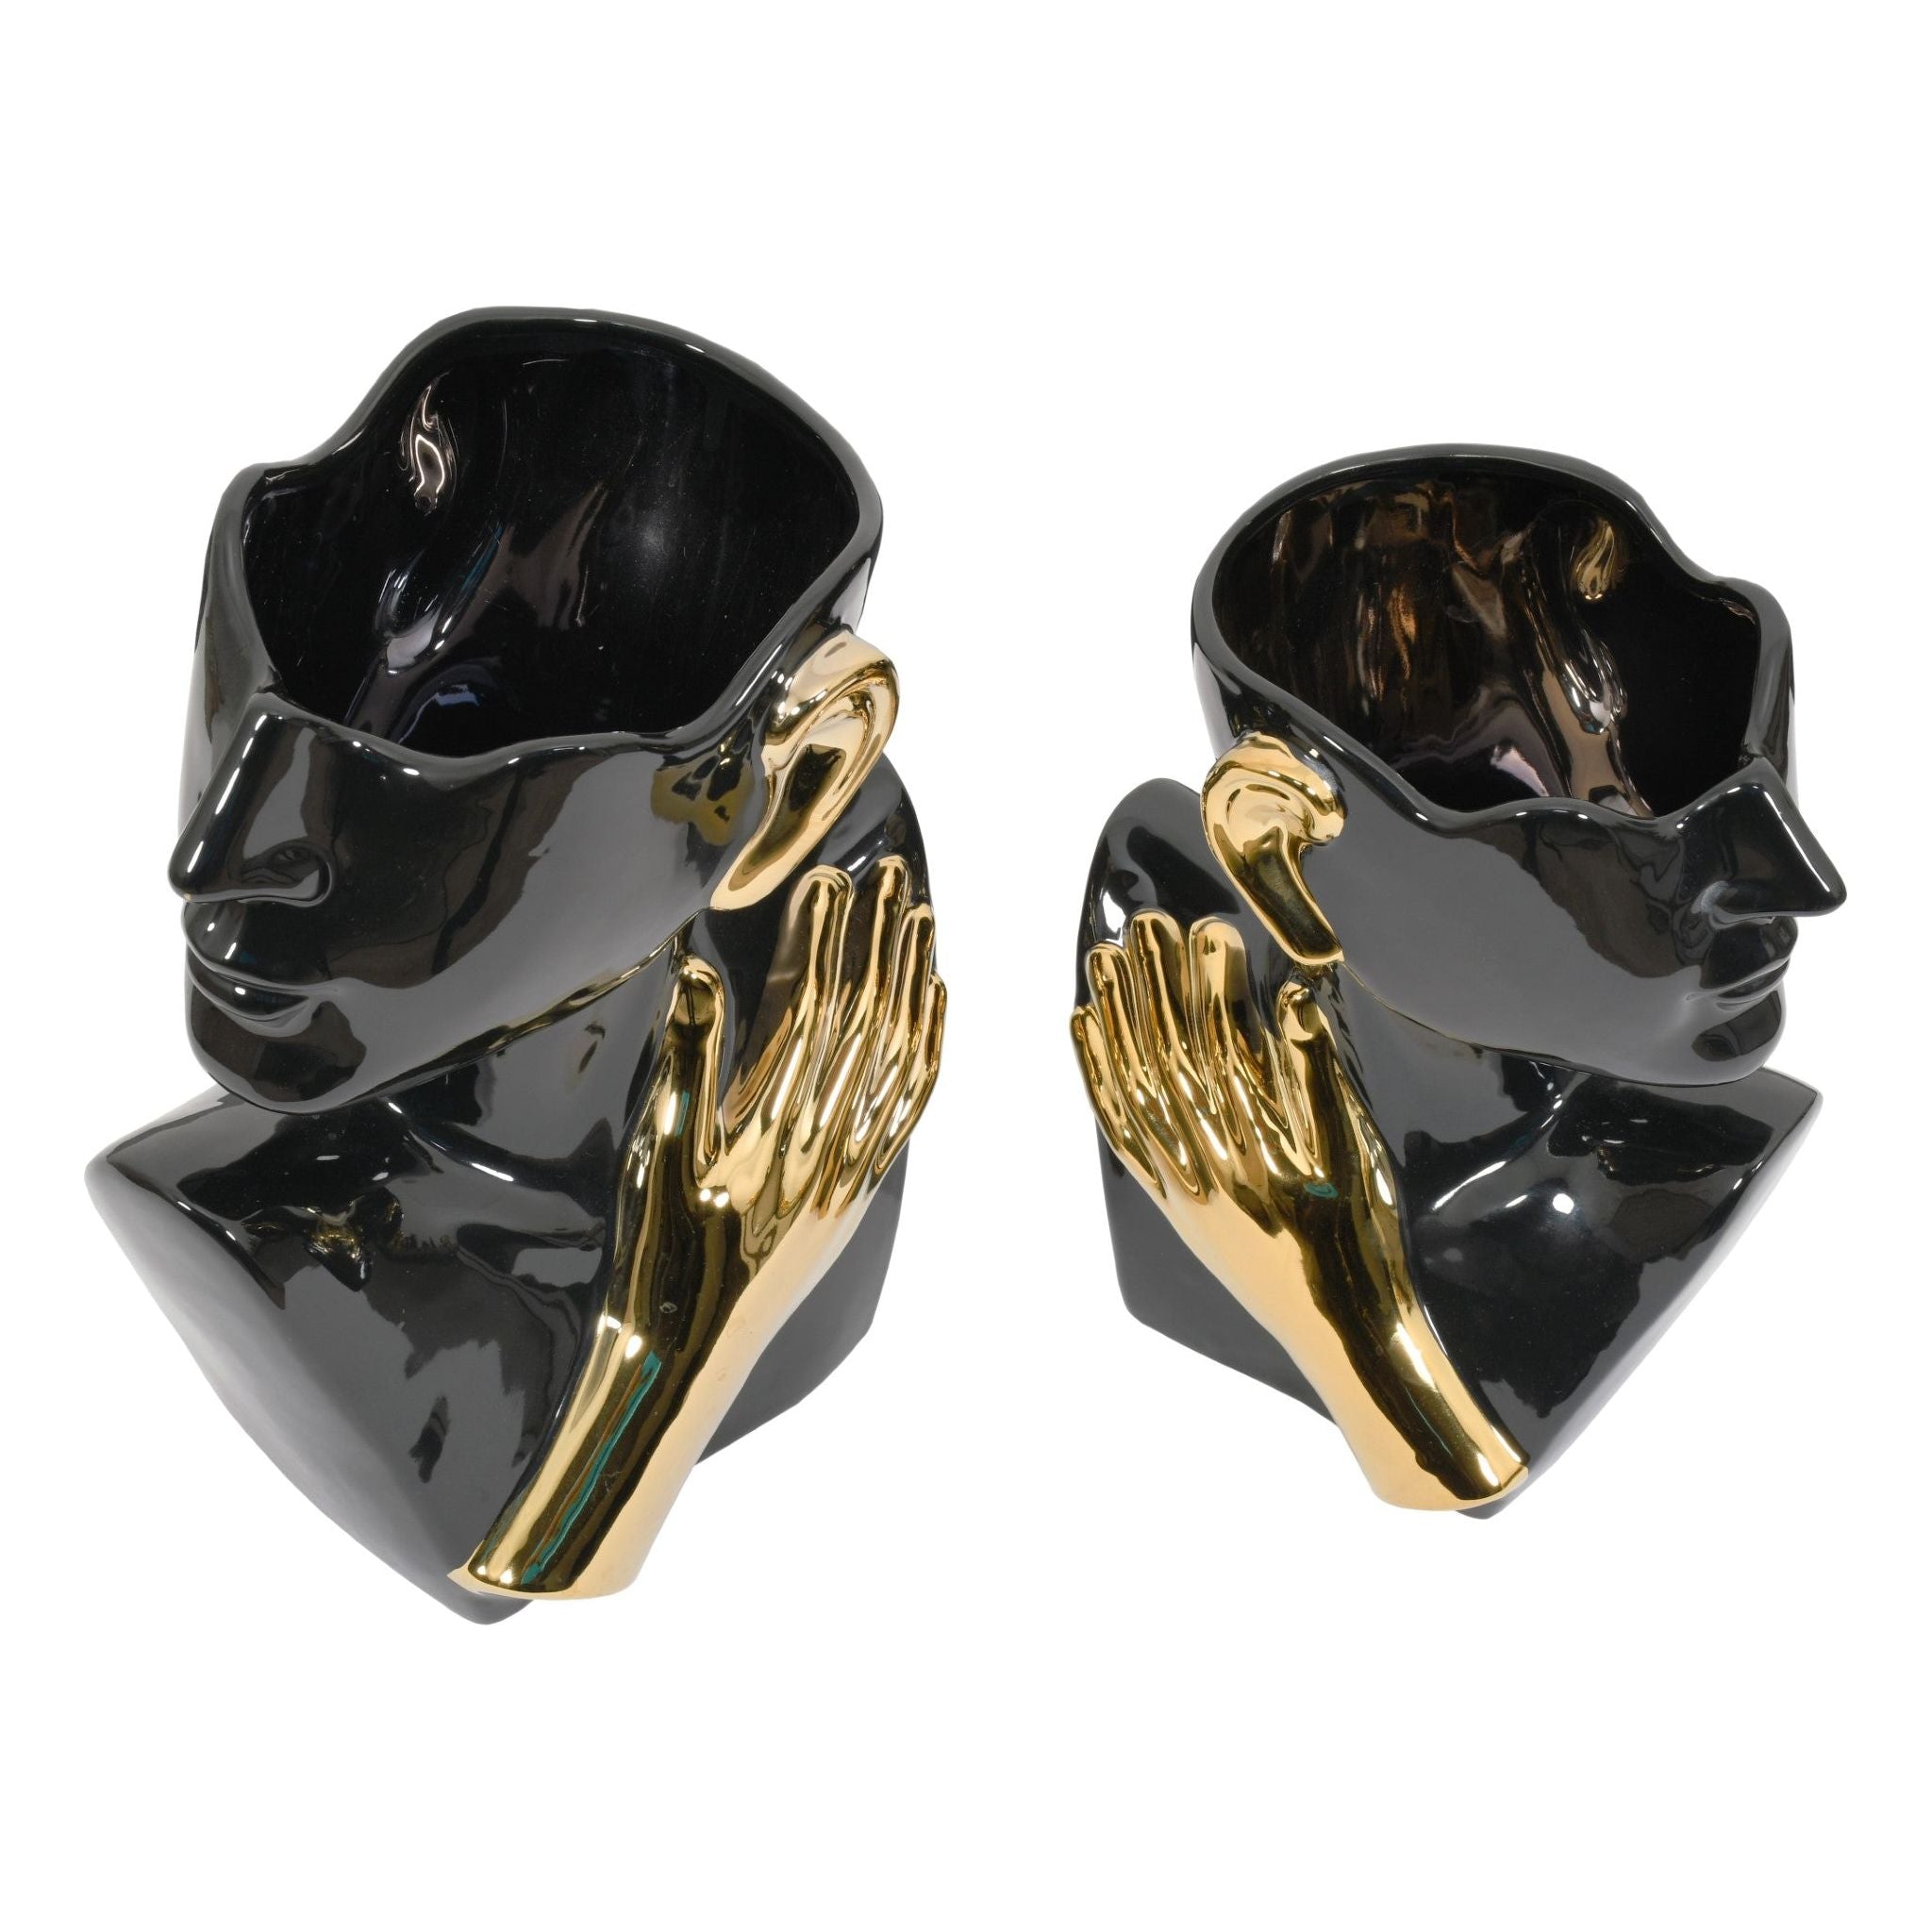 AFD Home  Abstract Torso Vases Black with Gold Accents Set of 2 - New Star Living